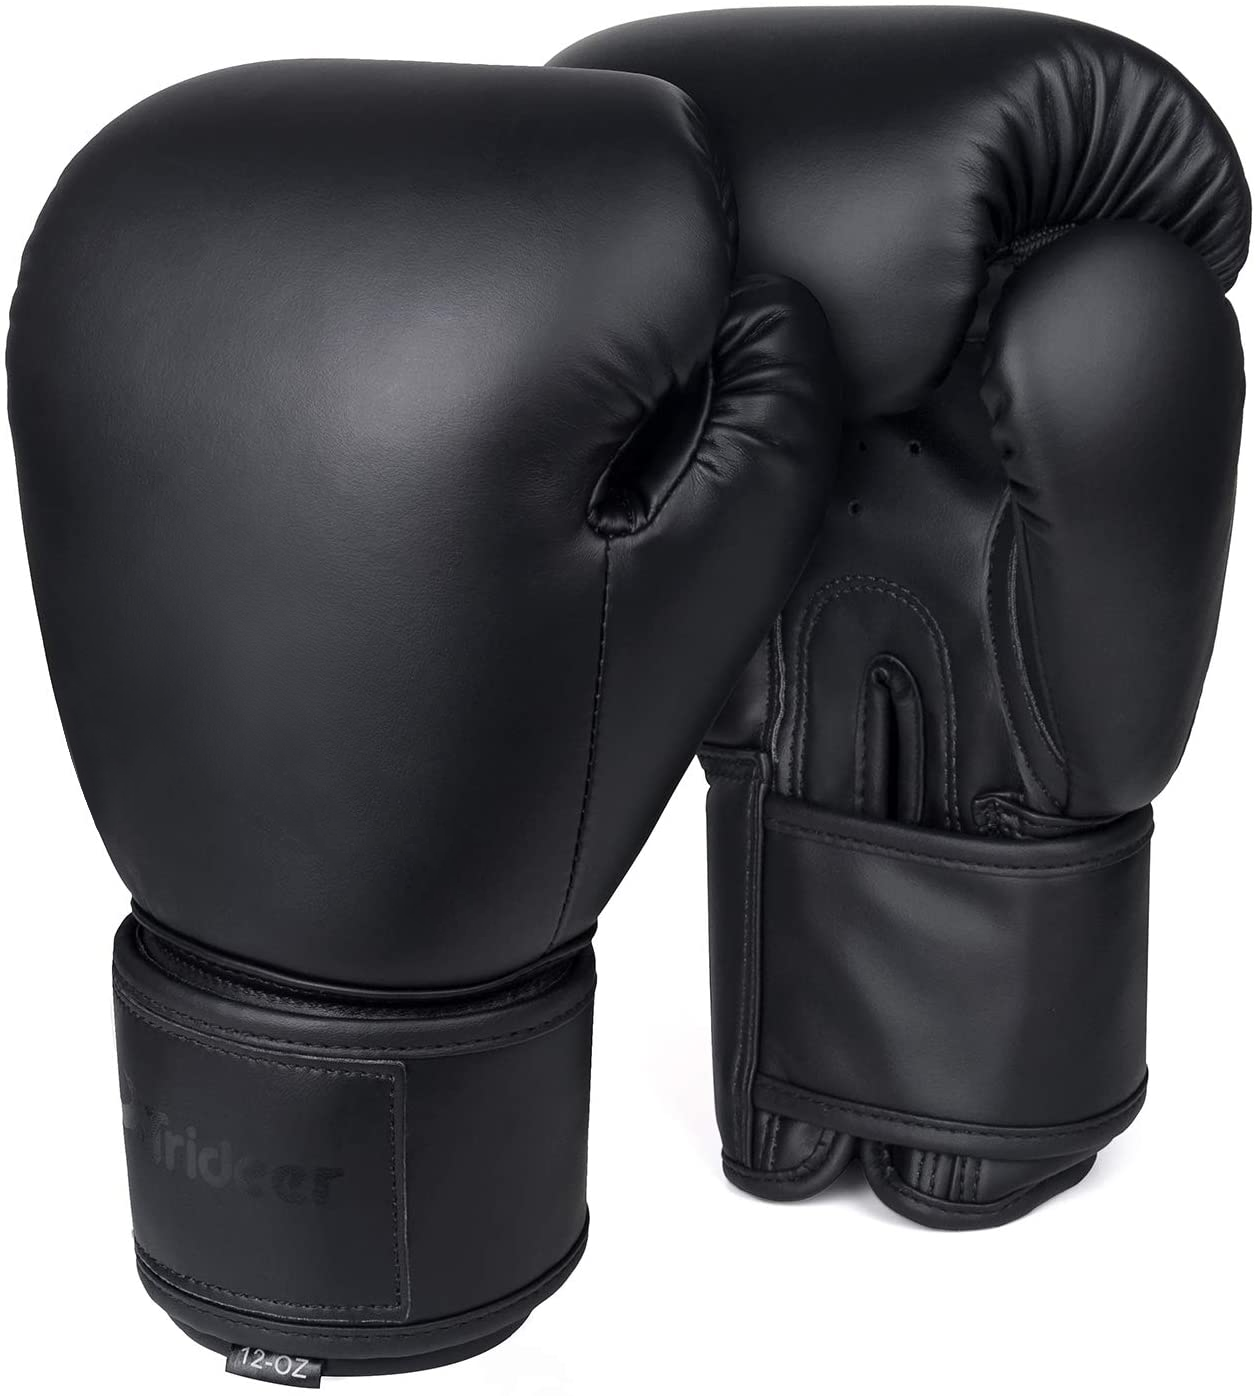 Sunland Leather Boxing Gloves Professional Training Gloves For Boxing